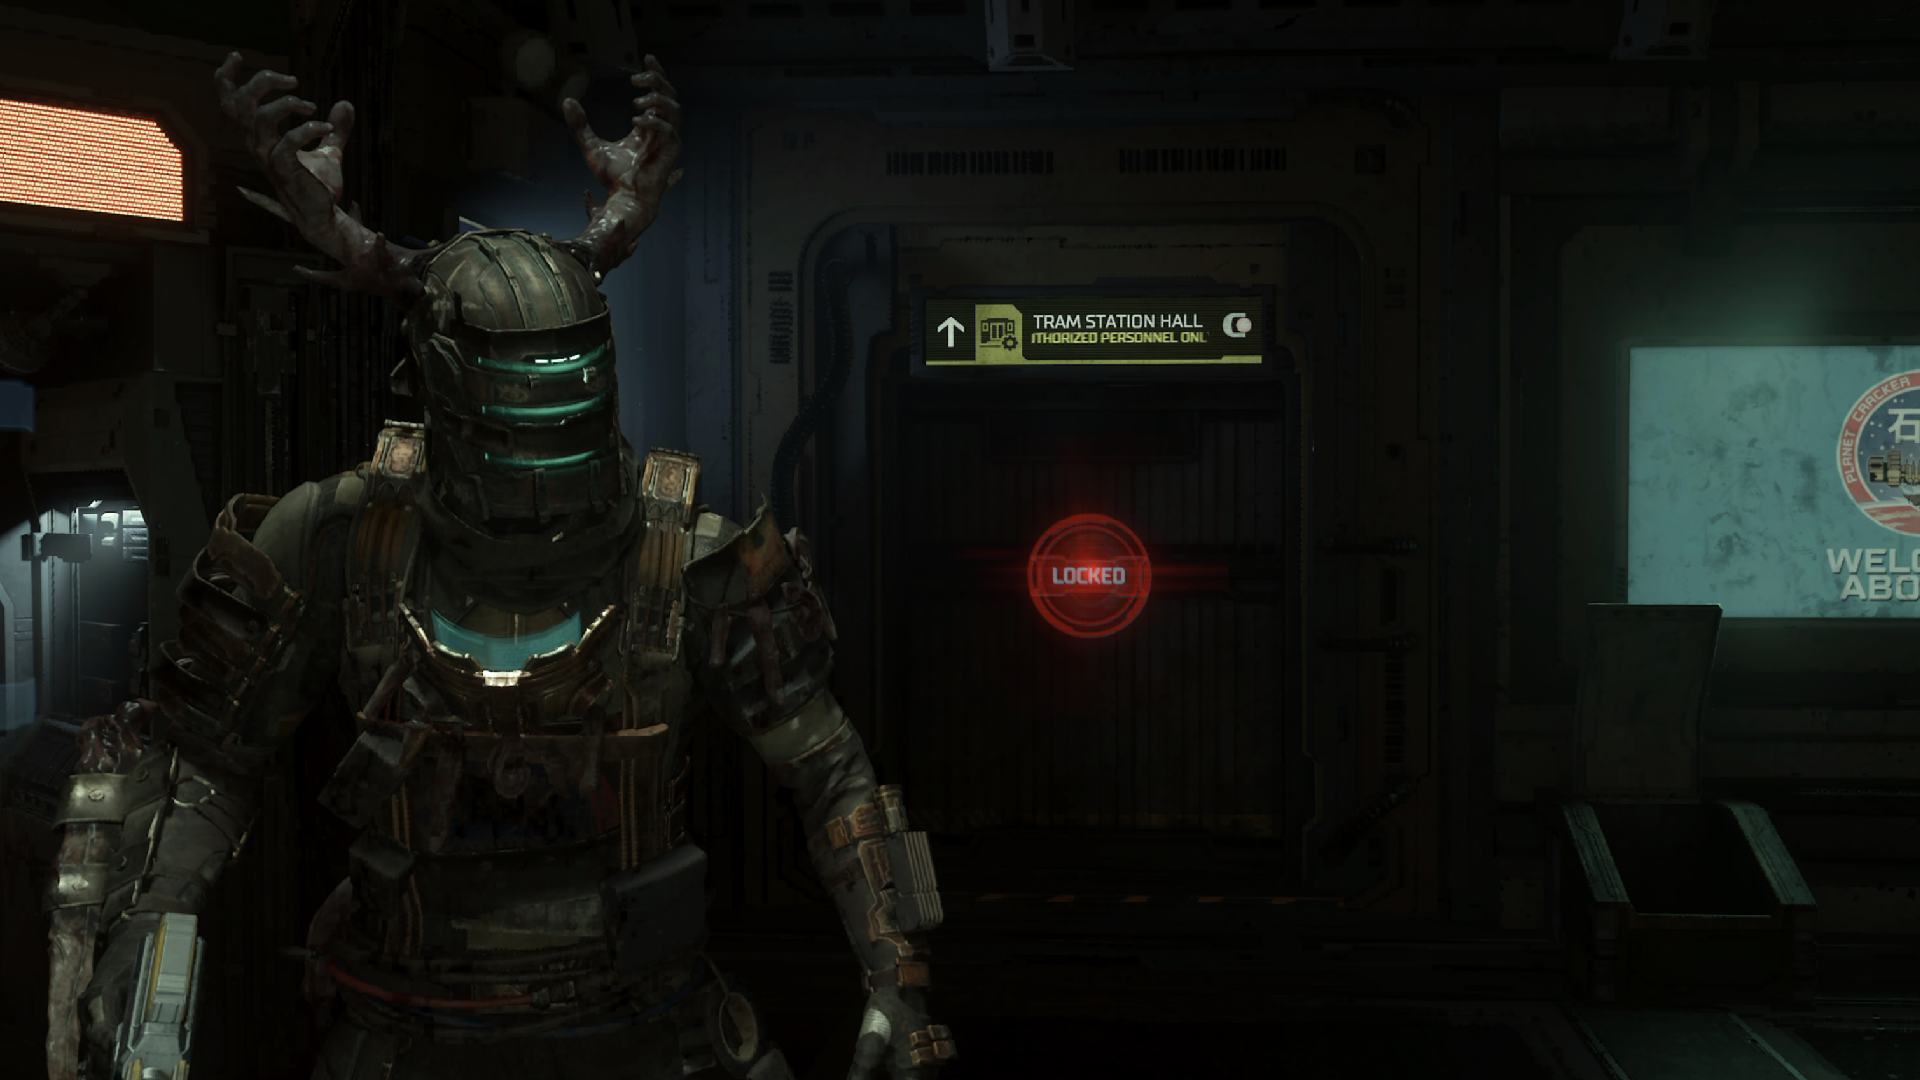 Dead Space remake: all suit upgrades, locations, and unlock conditions -  Video Games on Sports Illustrated